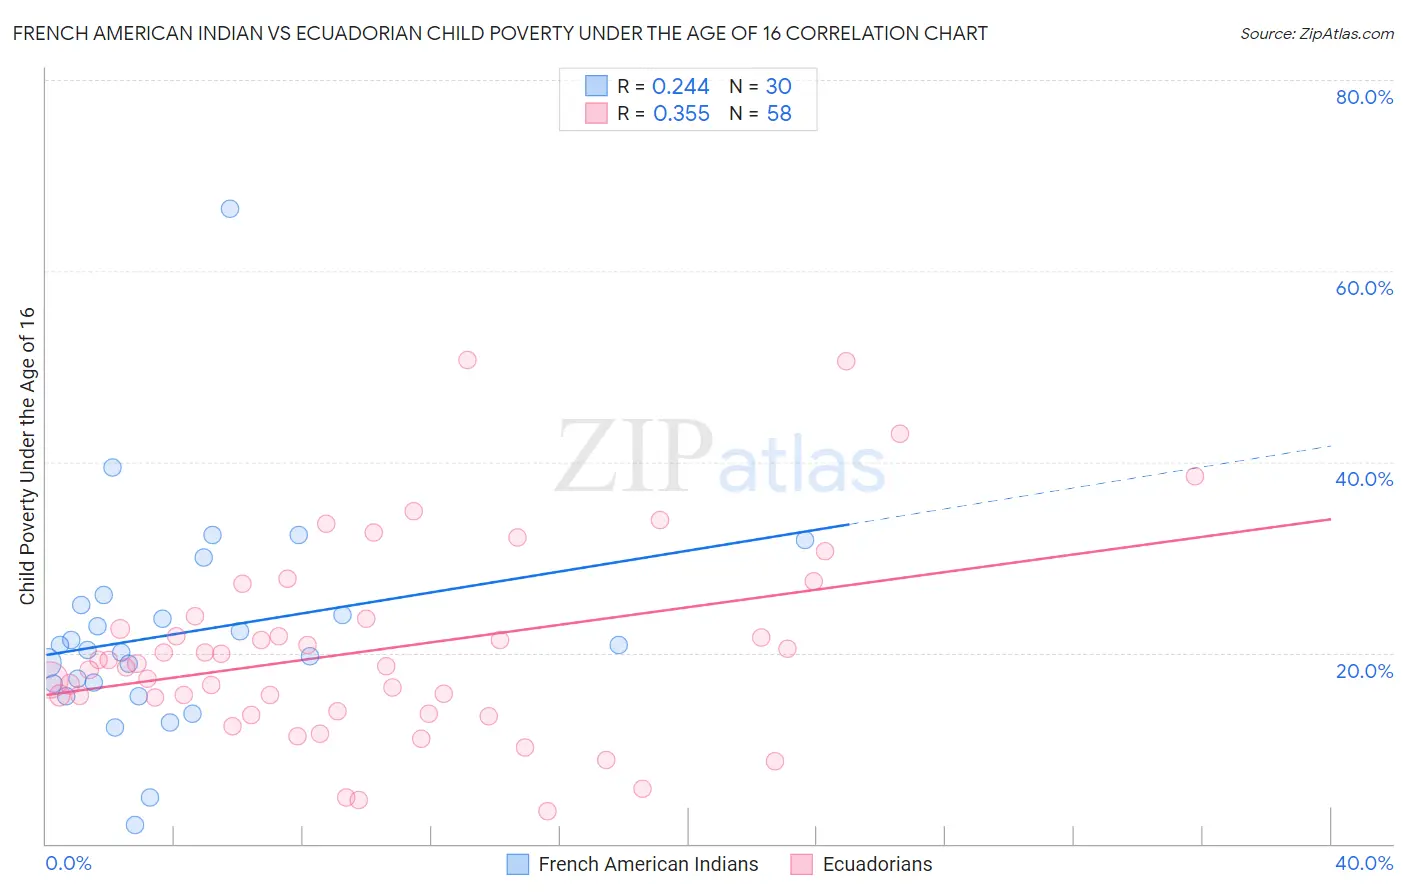 French American Indian vs Ecuadorian Child Poverty Under the Age of 16